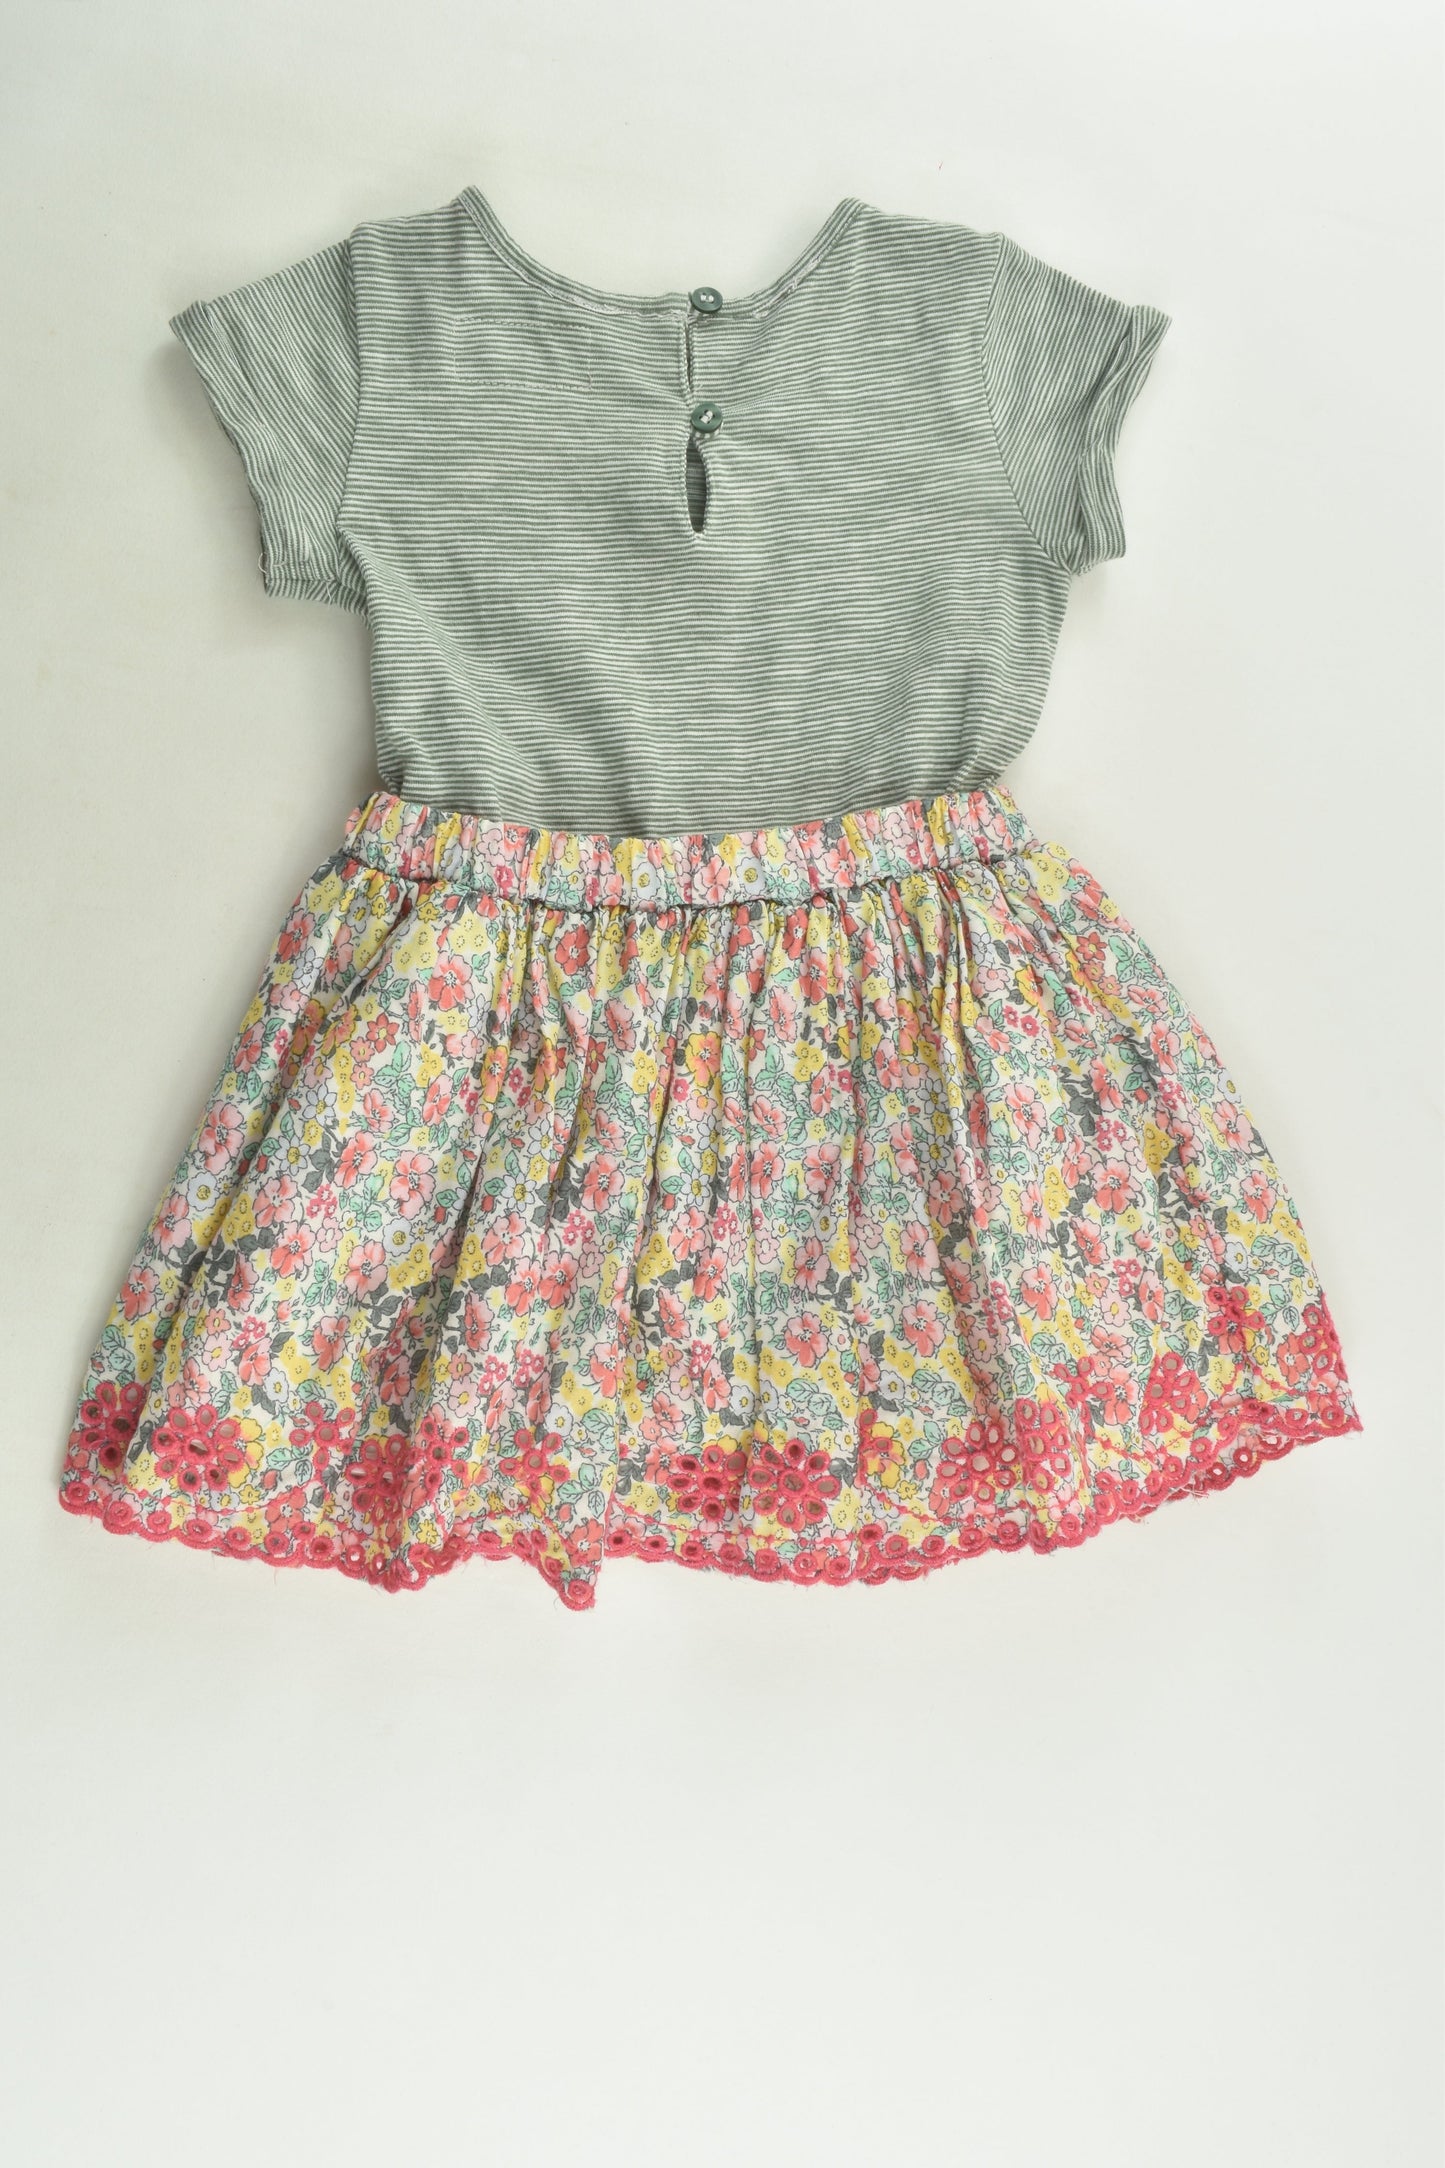 Next Size 0 Lined Bunny and Liberty Print Dress